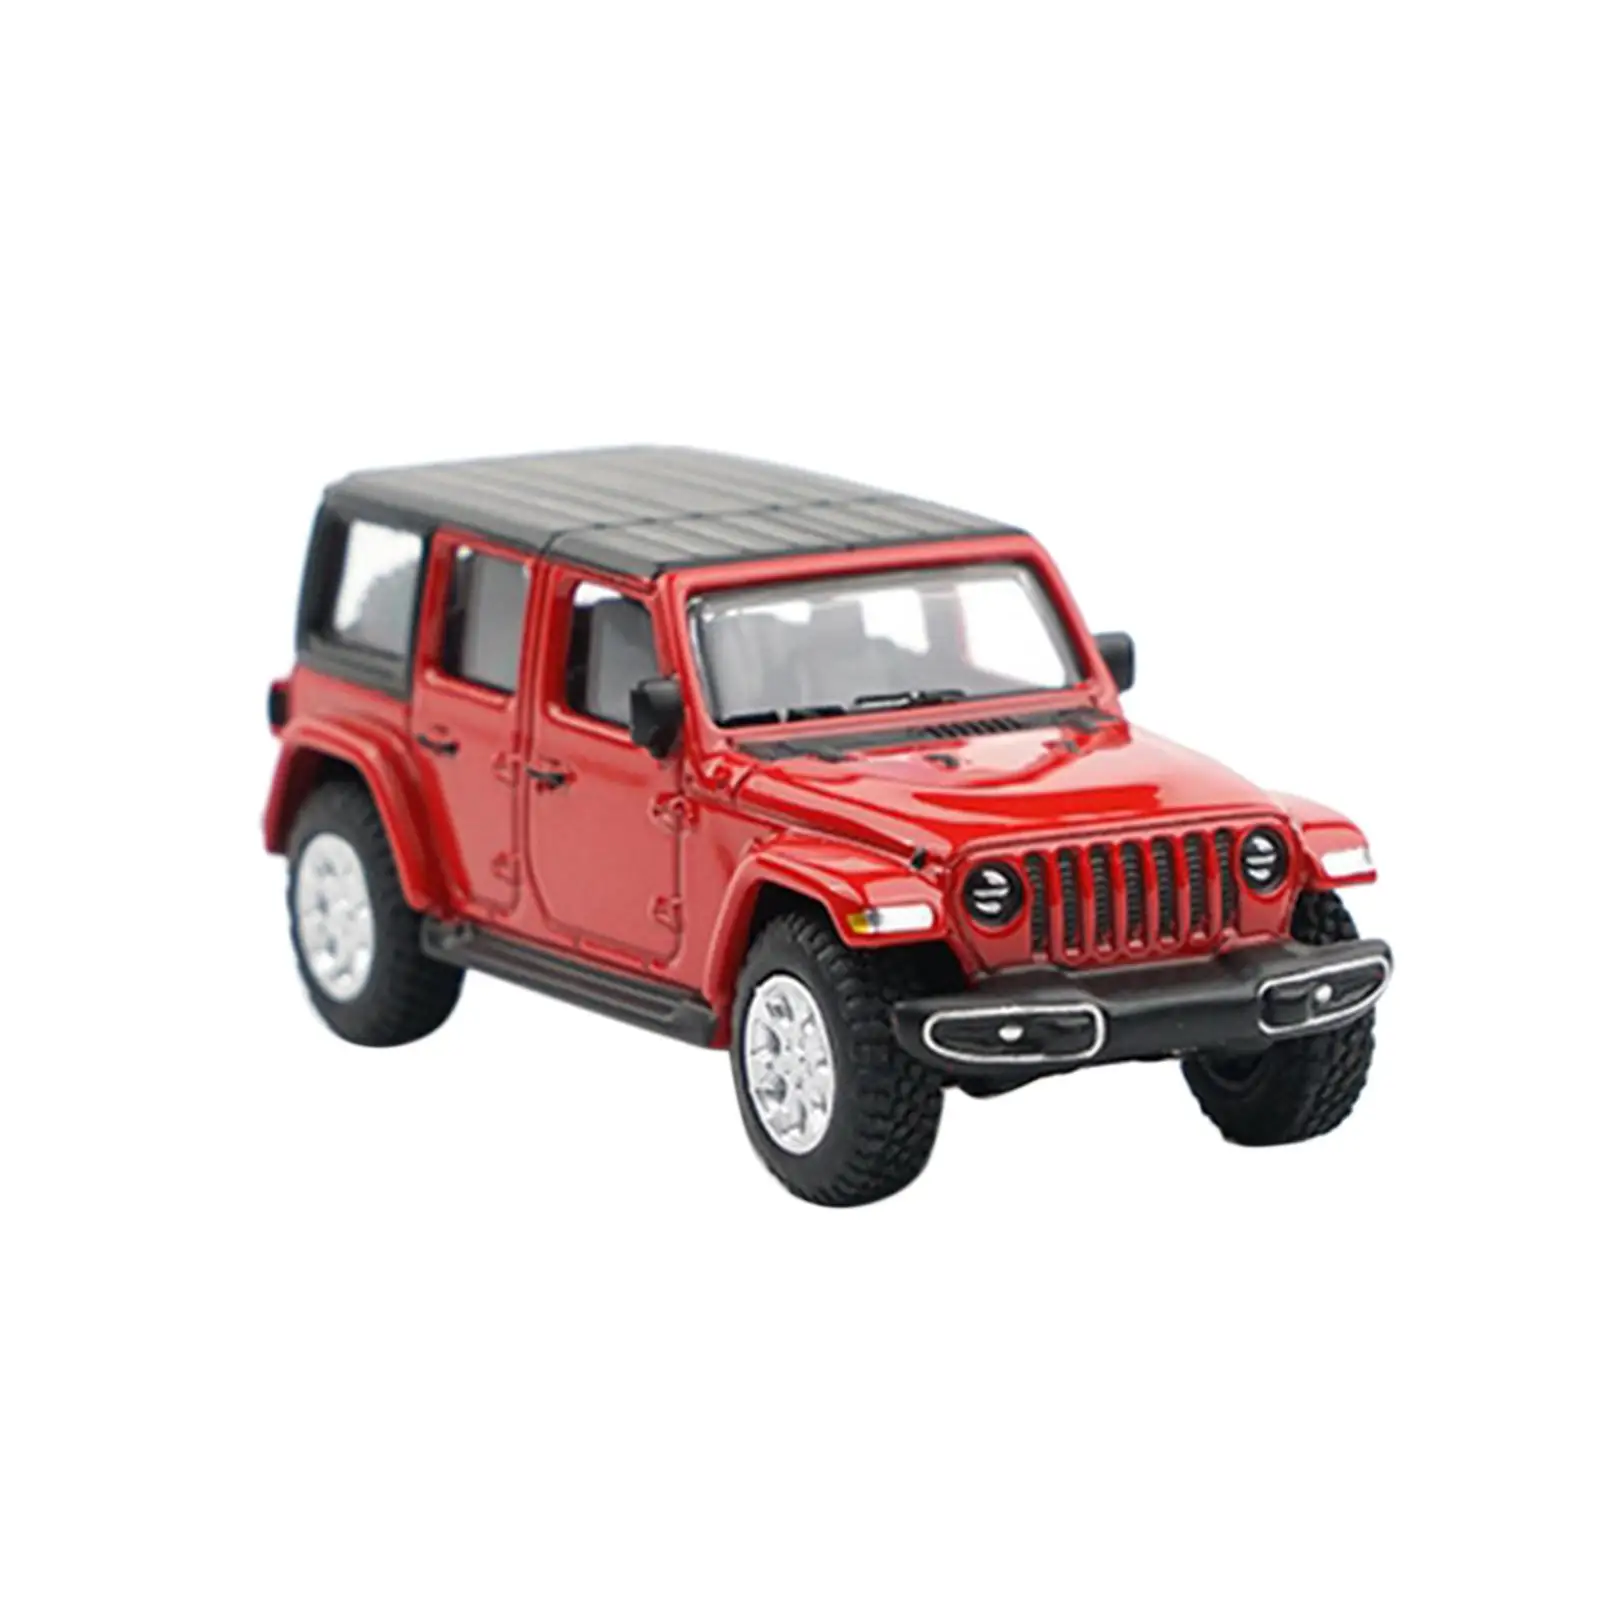 

1/64 Diecast Cars Alloy Casting Collectible Diecast Model Car 1/64 Car Model for Adults boy Gift Toddlers